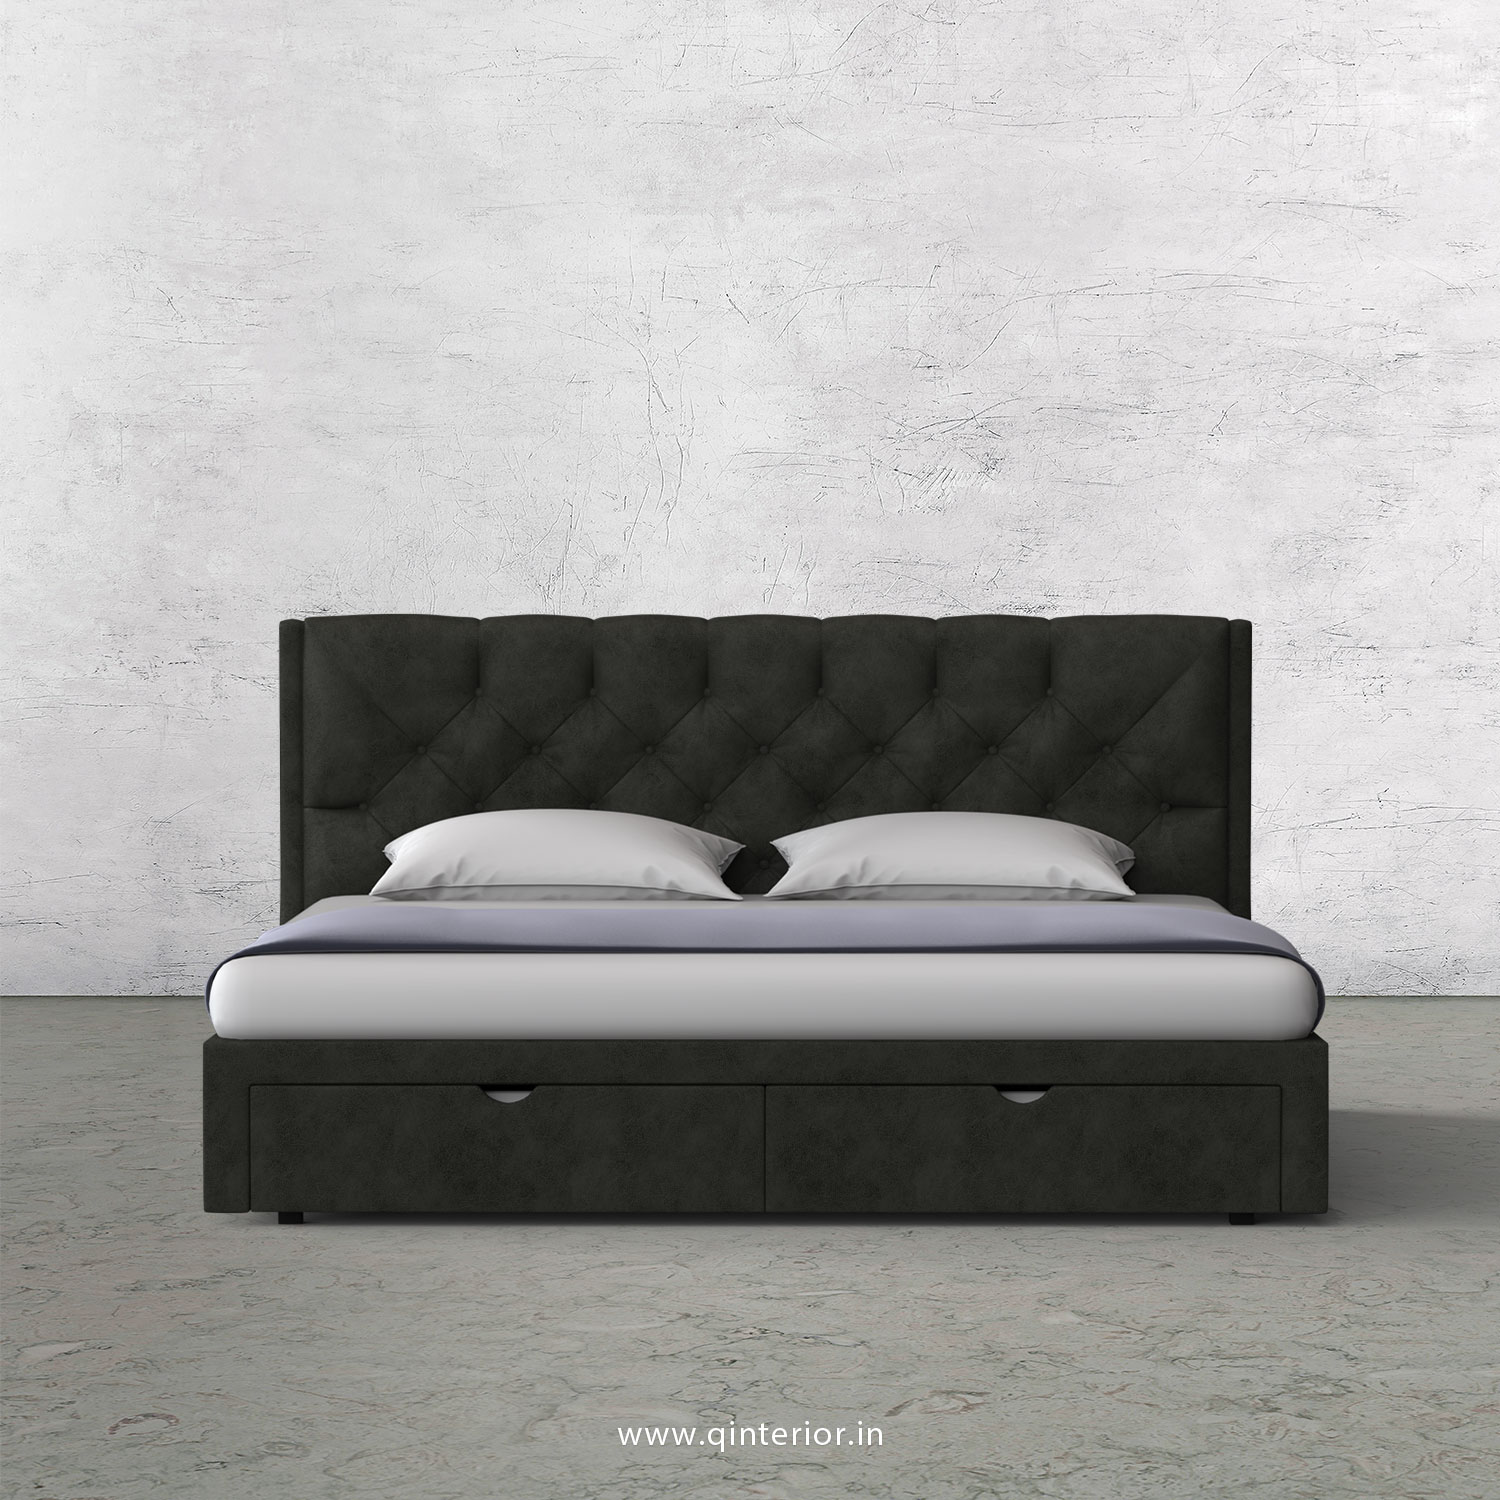 Scorpius King Size Storage Bed in Fab Leather Fabric - KBD001 FL07